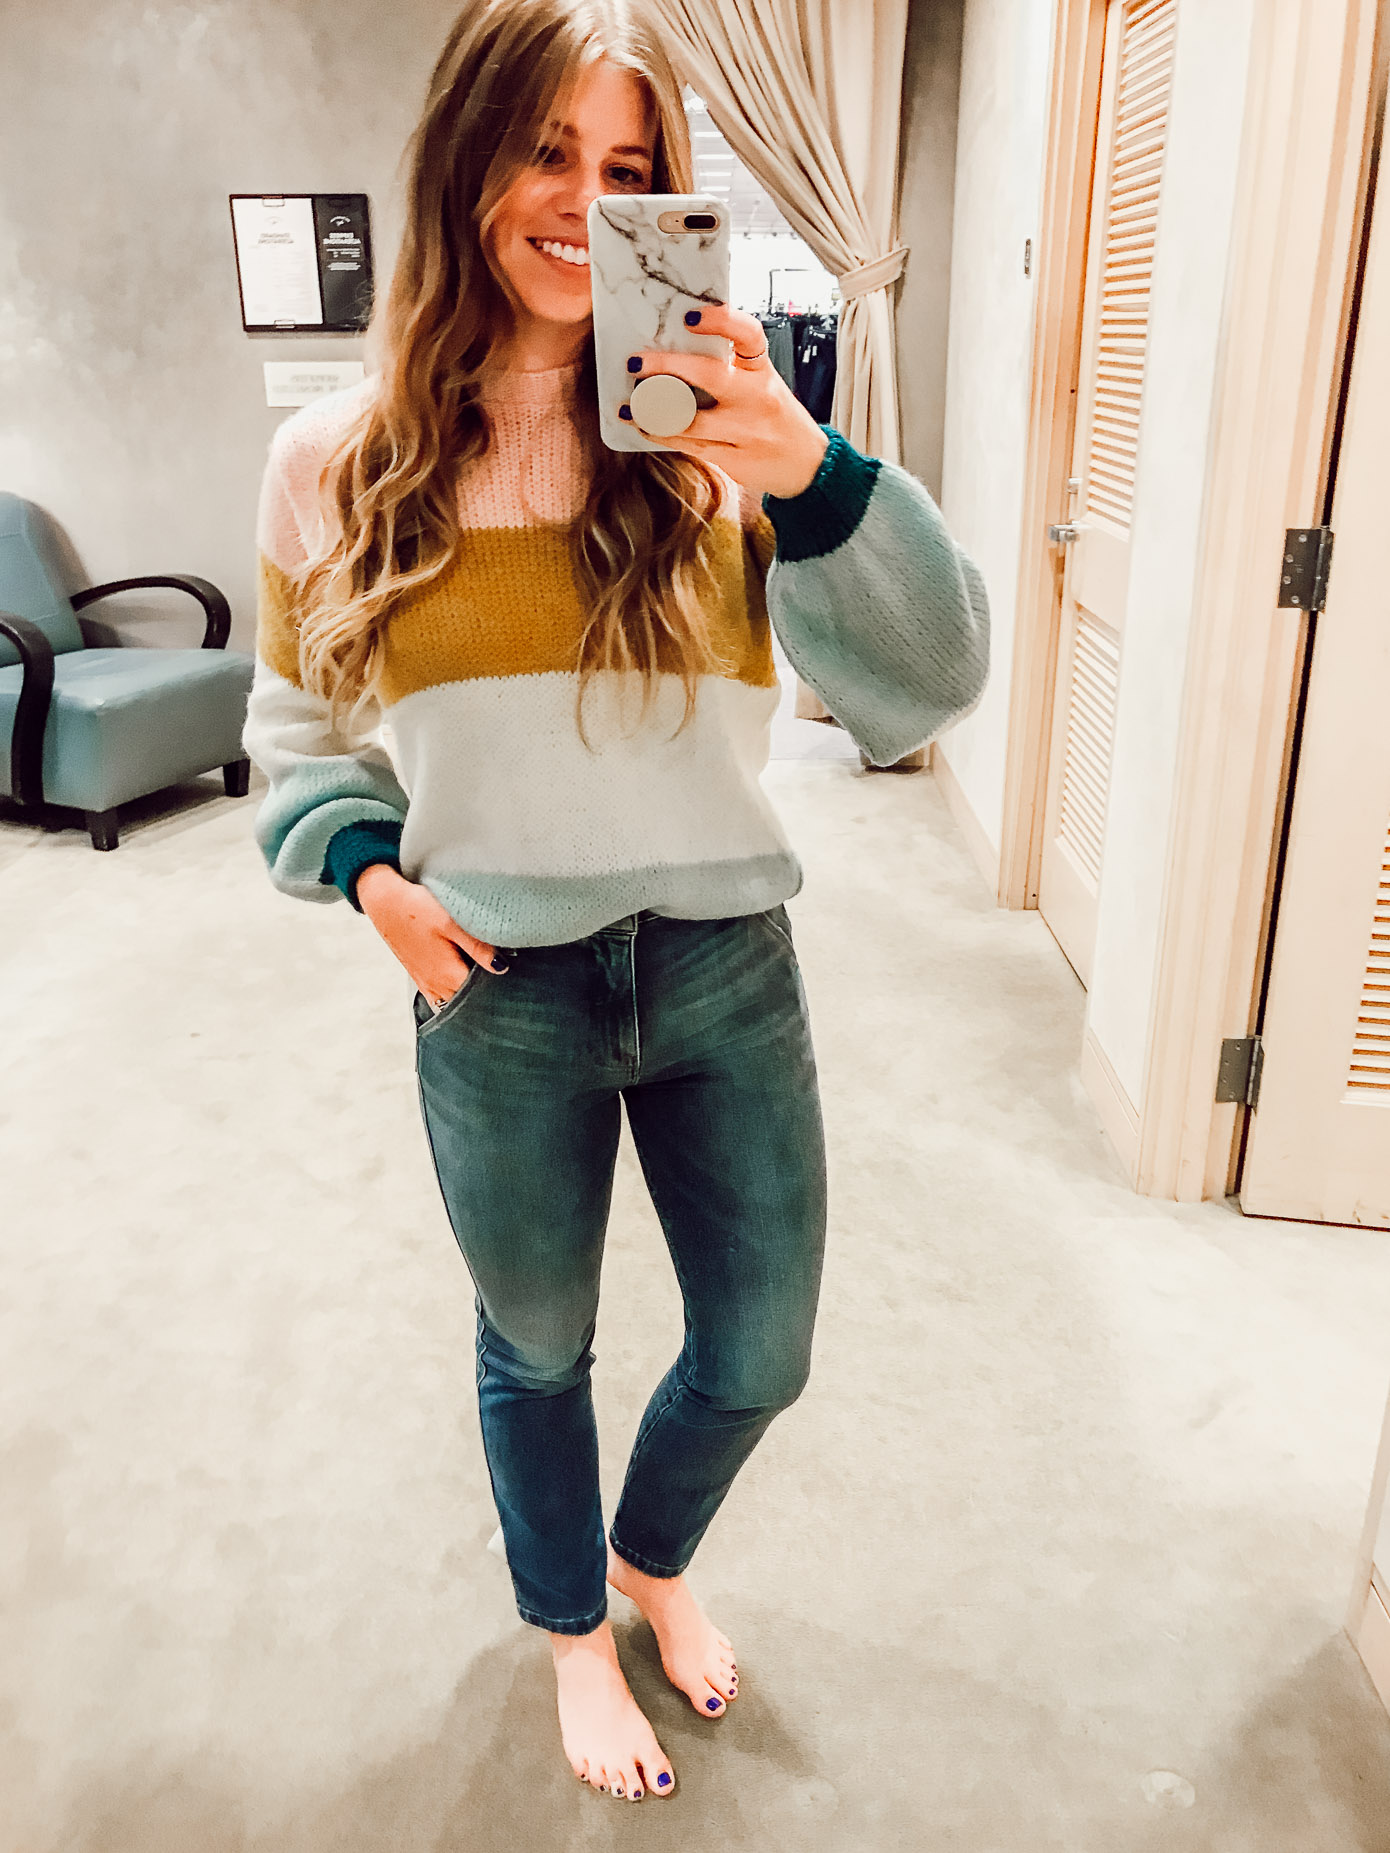 Topshop Colorblock Knit Pullover | 2018 Nordstrom Anniversary Fitting Room Session featured on Louella Reese Life & Style Blog